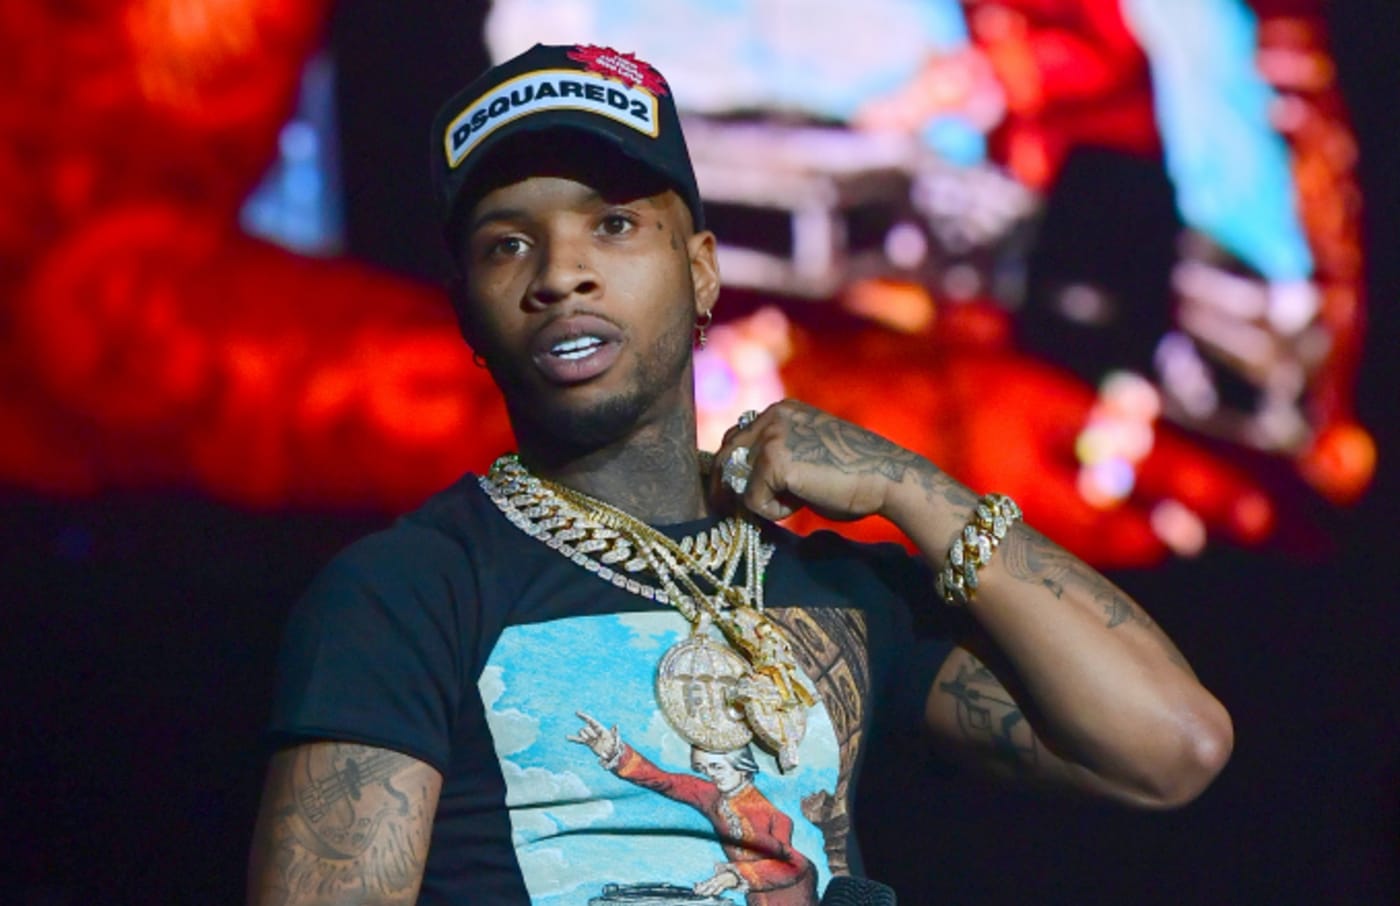 Tory Lanez performs at V103 Winterfest at State Farm Arena